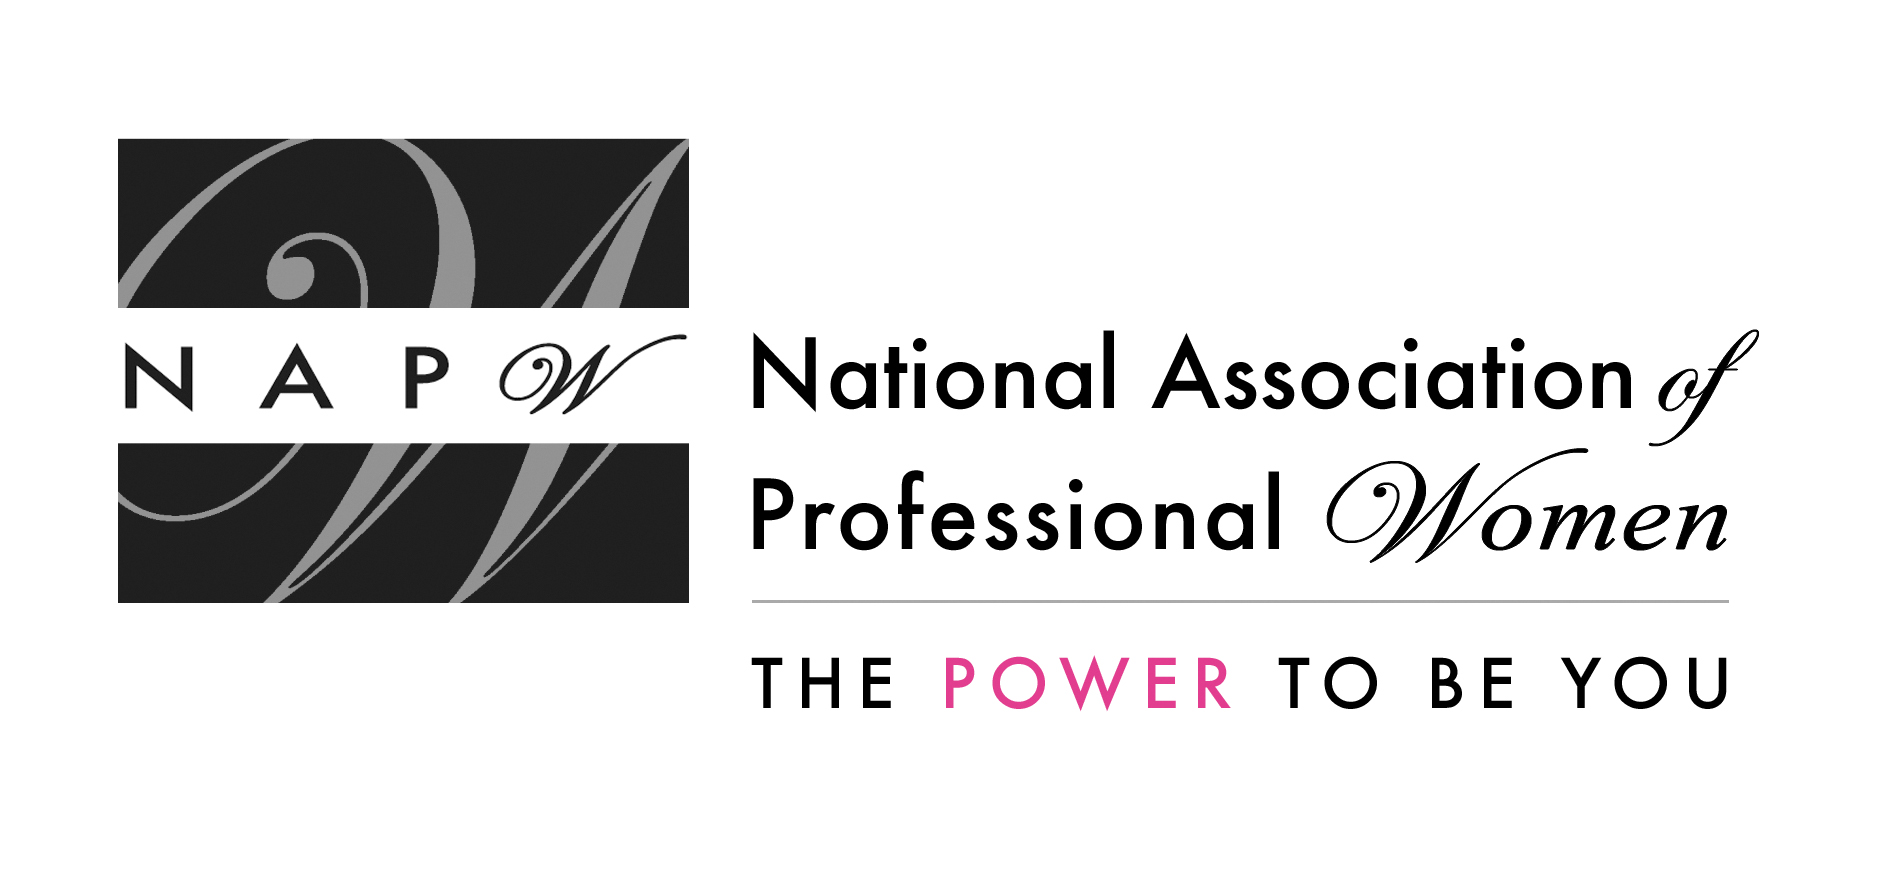 Tena Thixton is a proud member of the National Association of Professional Women